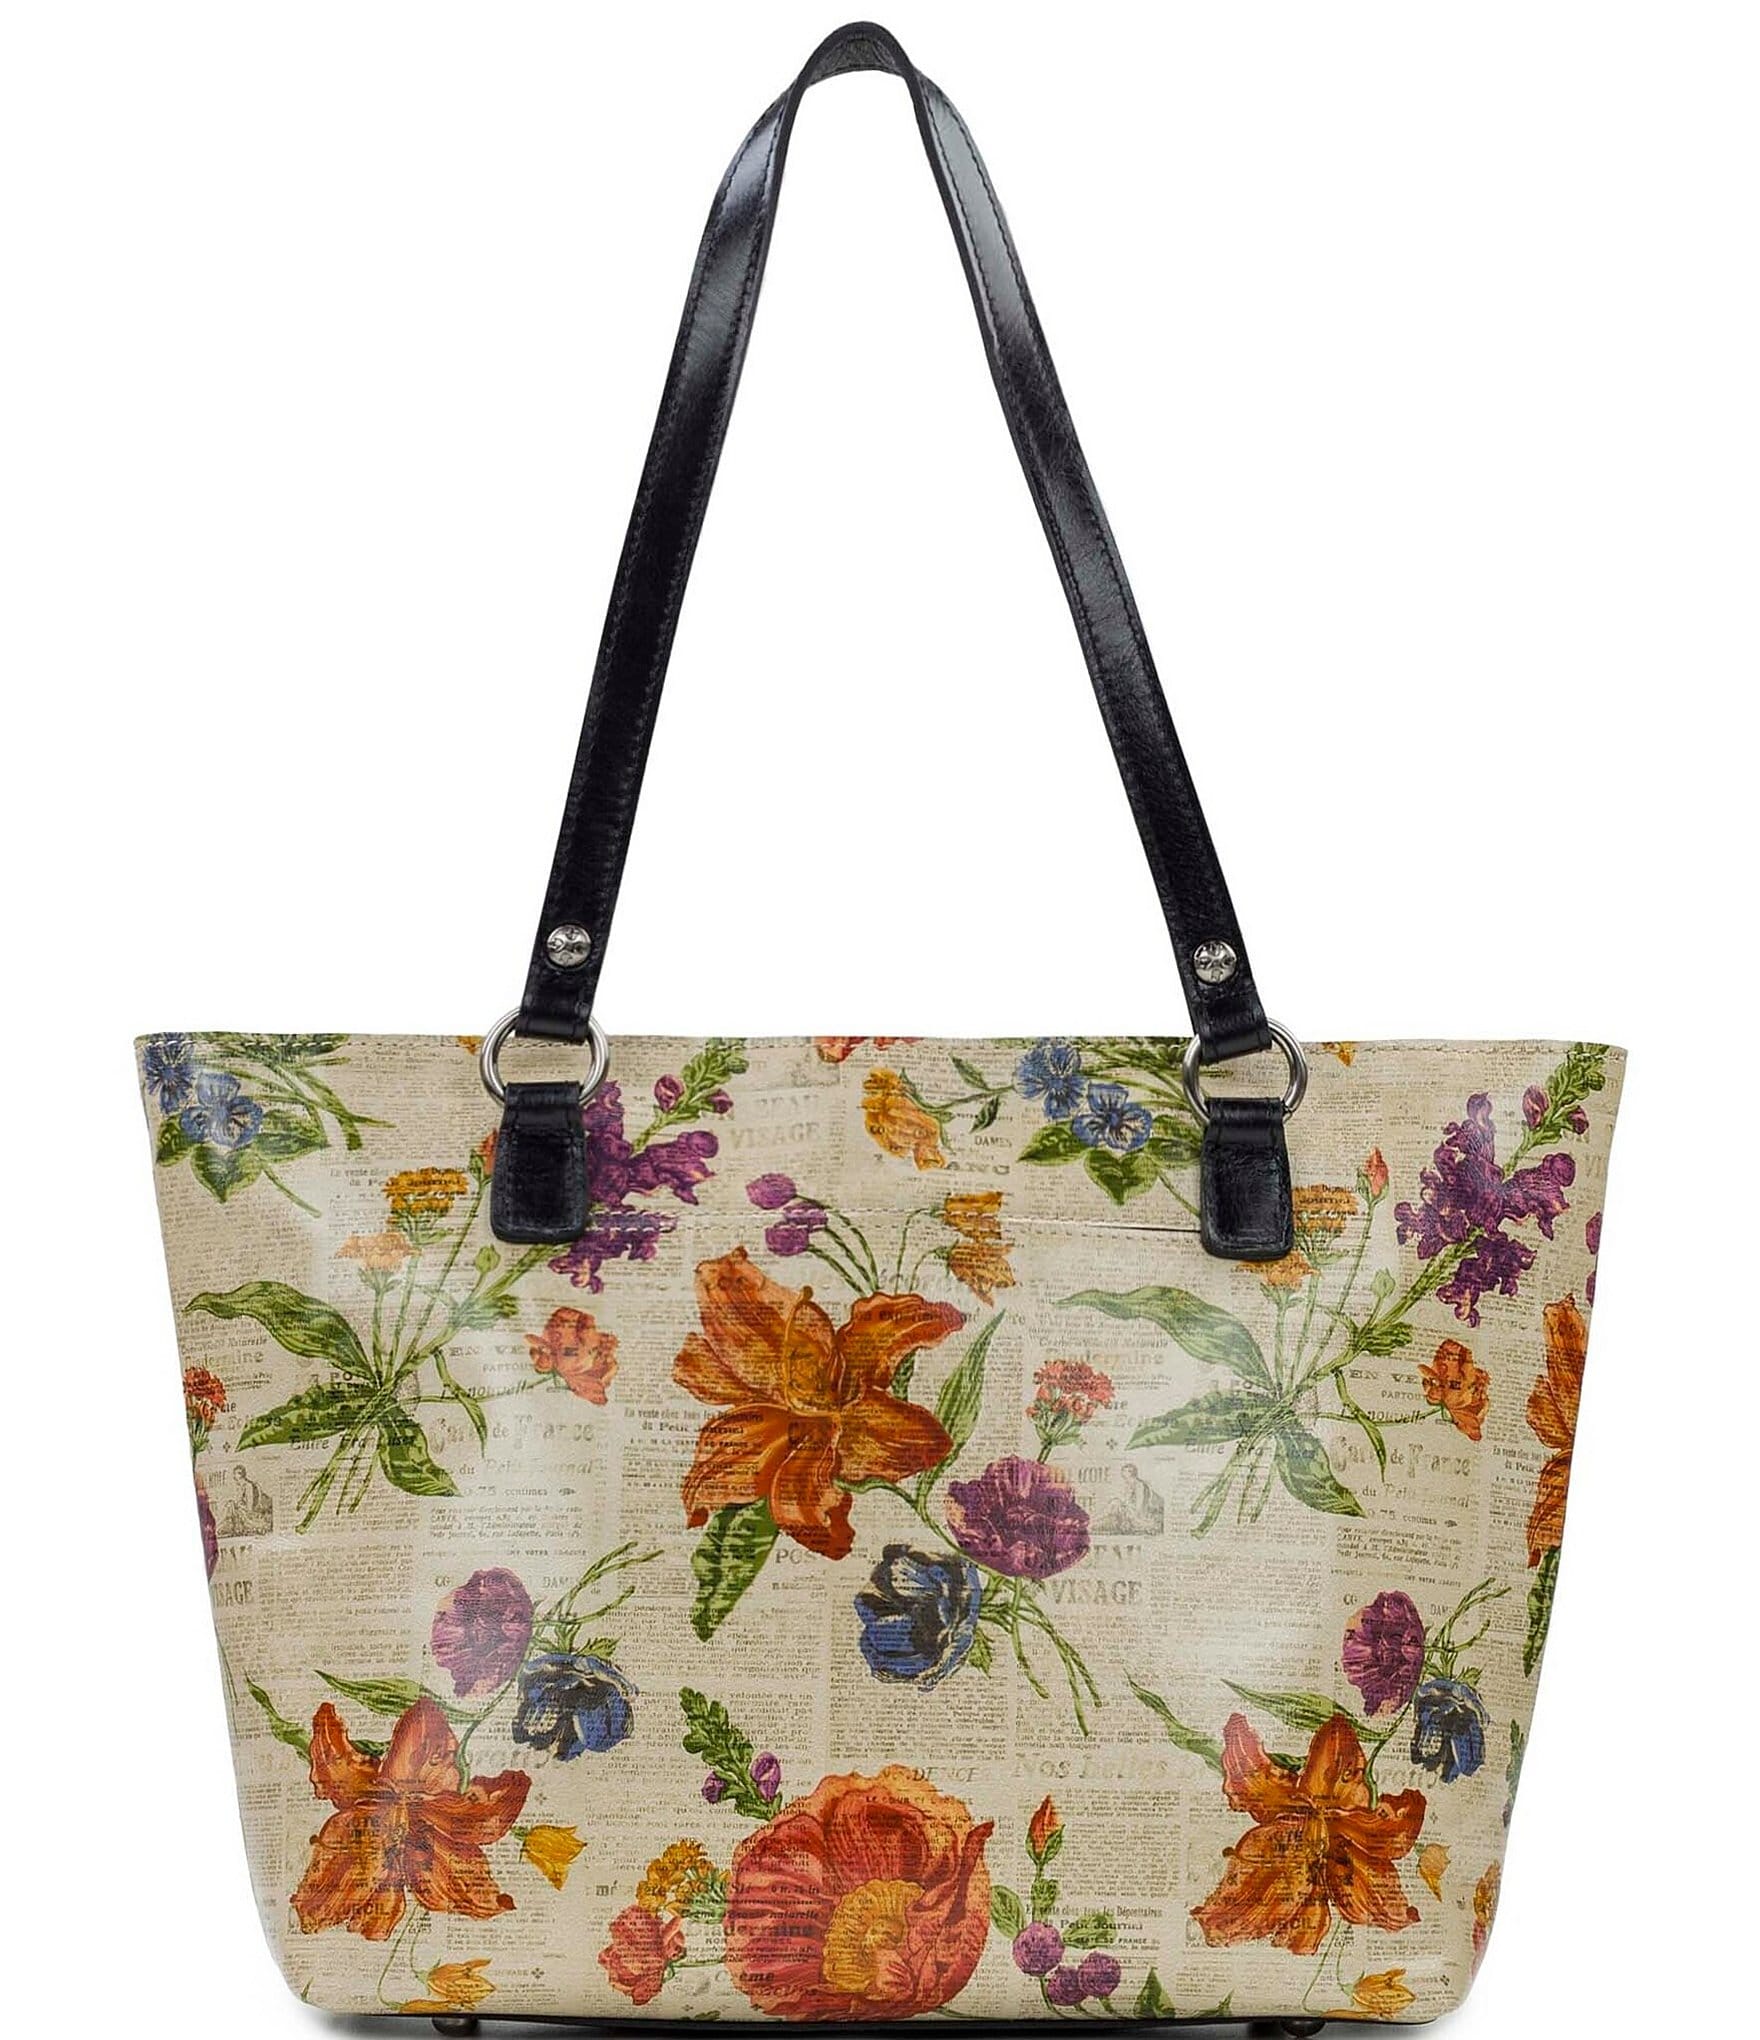 Newspaper Tote Bags for Sale | Redbubble